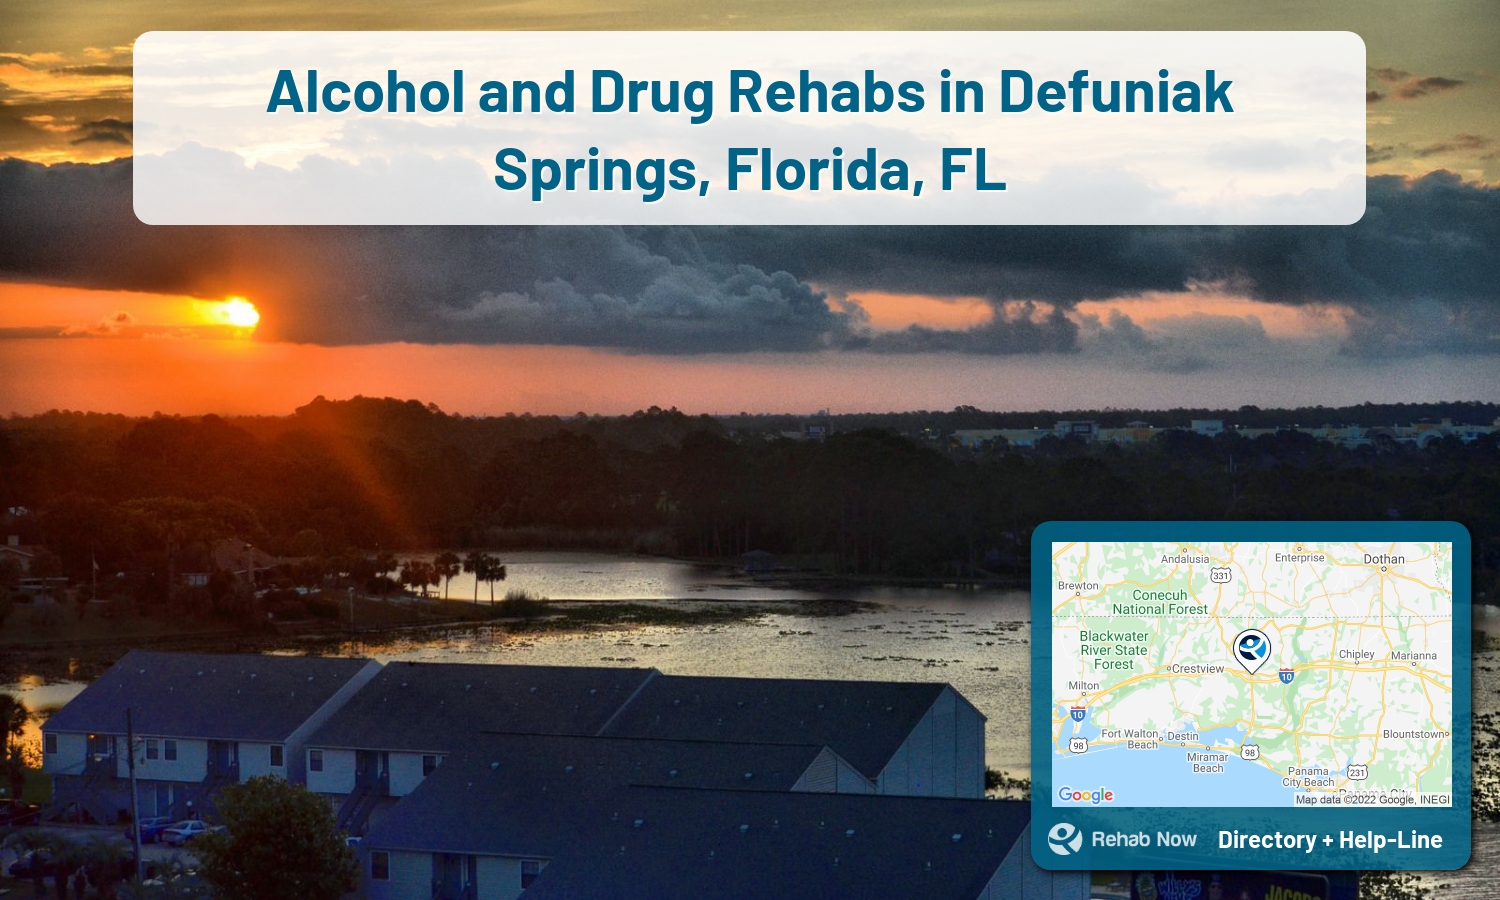 Let our expert counselors help find the best addiction treatment in Defuniak Springs, Florida now with a free call to our hotline.